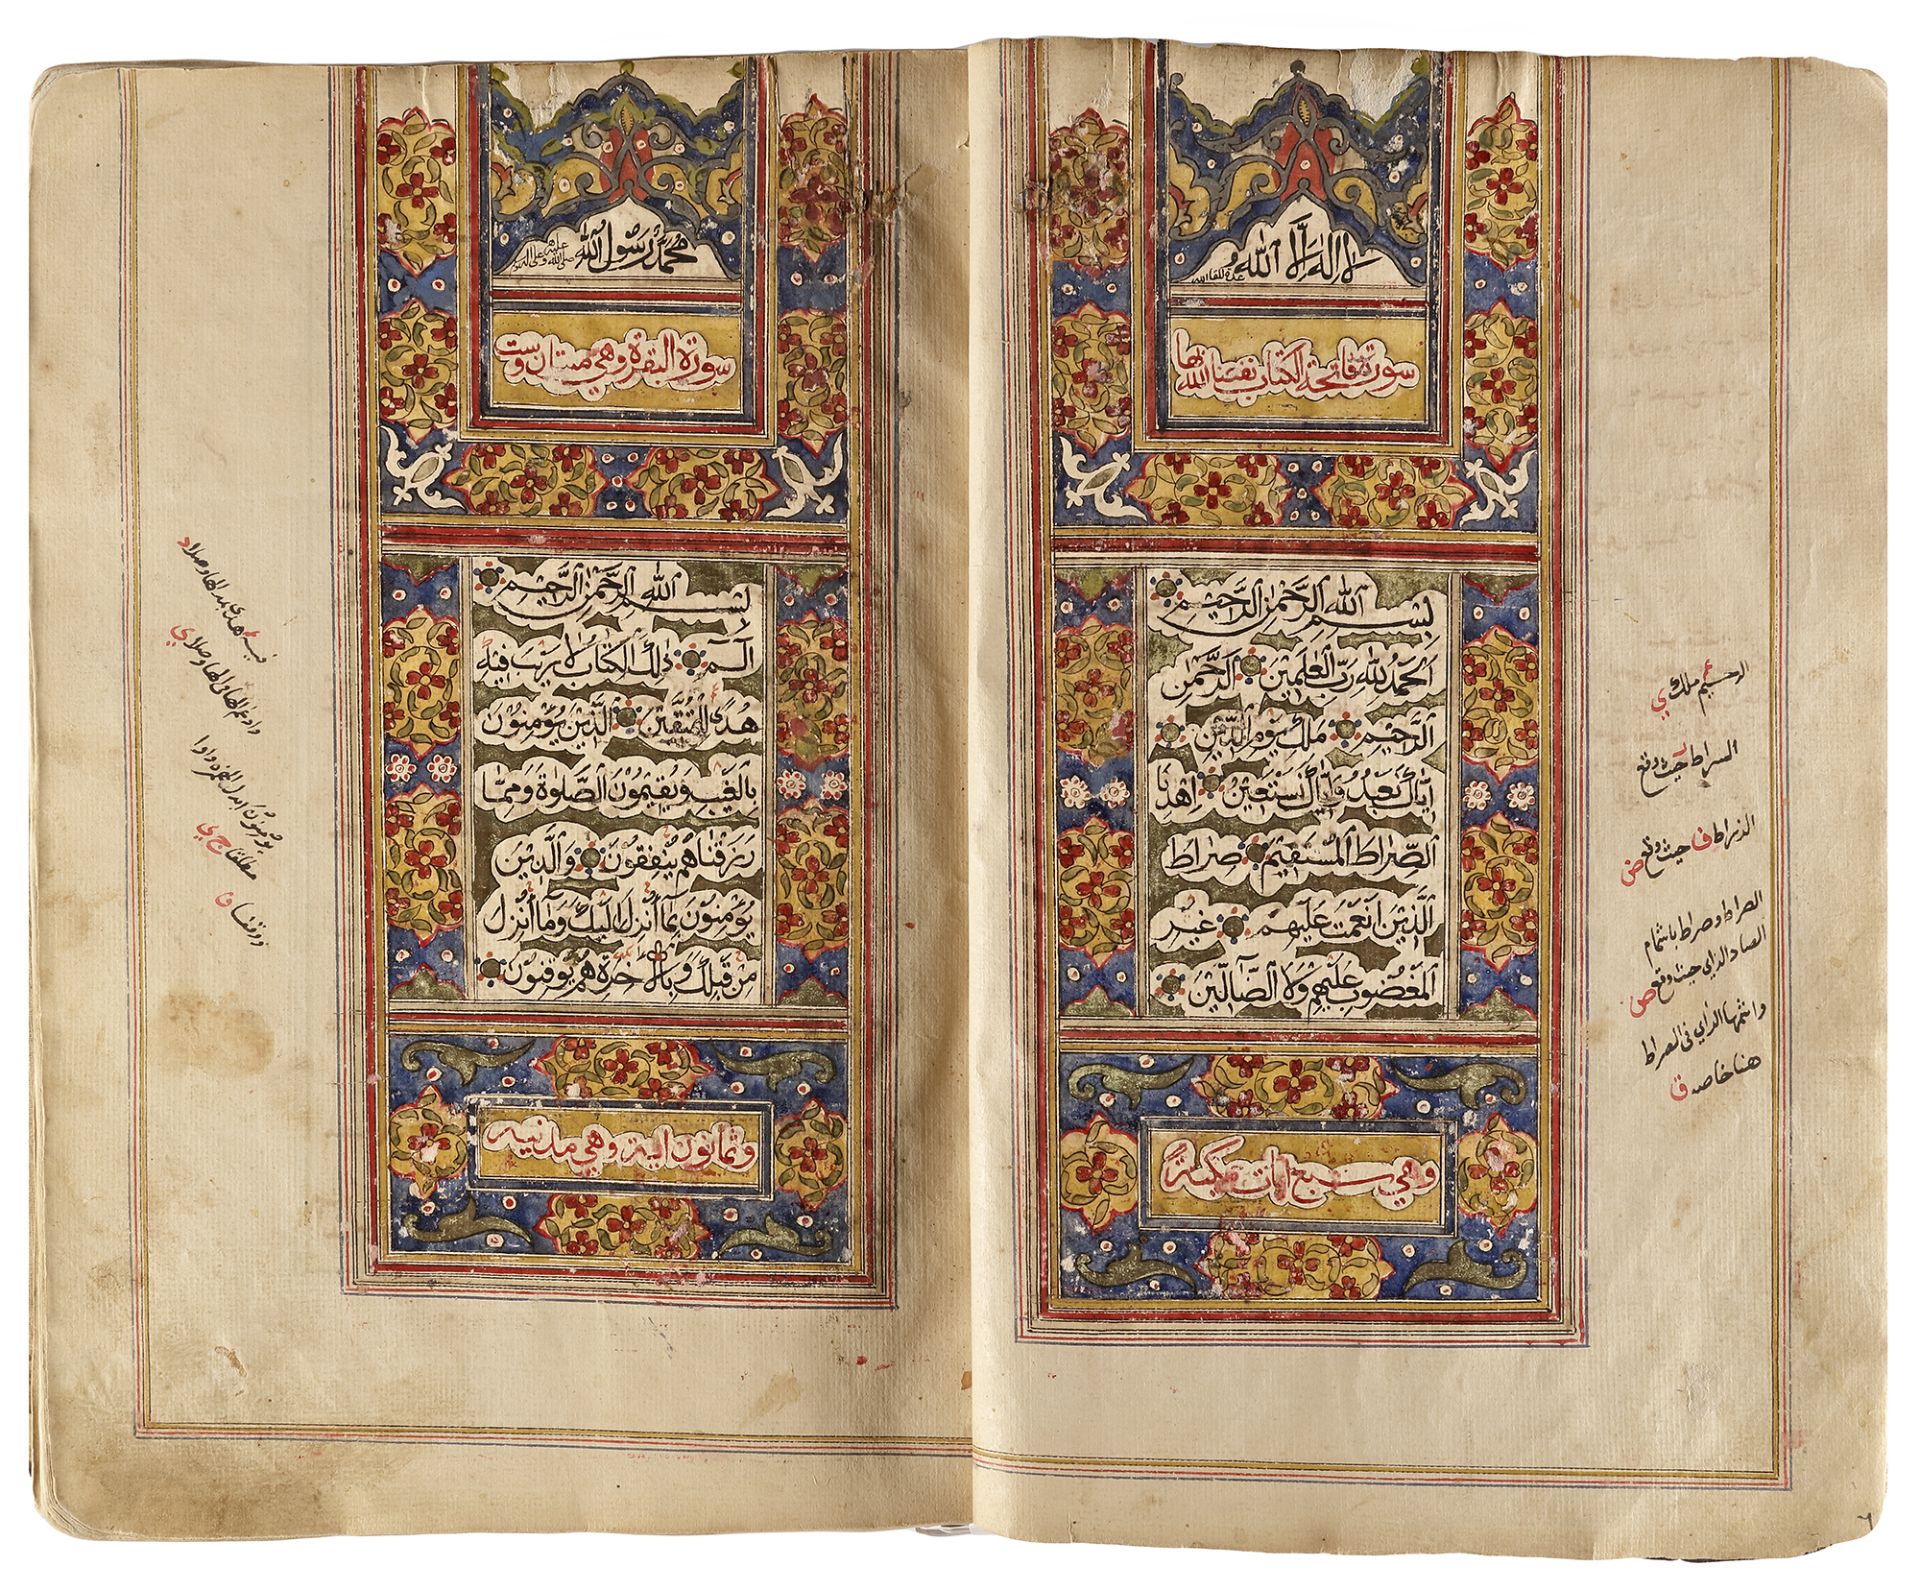 AN ILLUMINATED QURAN, YEMEN, BY AHMED QASEM IBN ISMAIL IN 1035 AH/1626 AD - Image 2 of 18